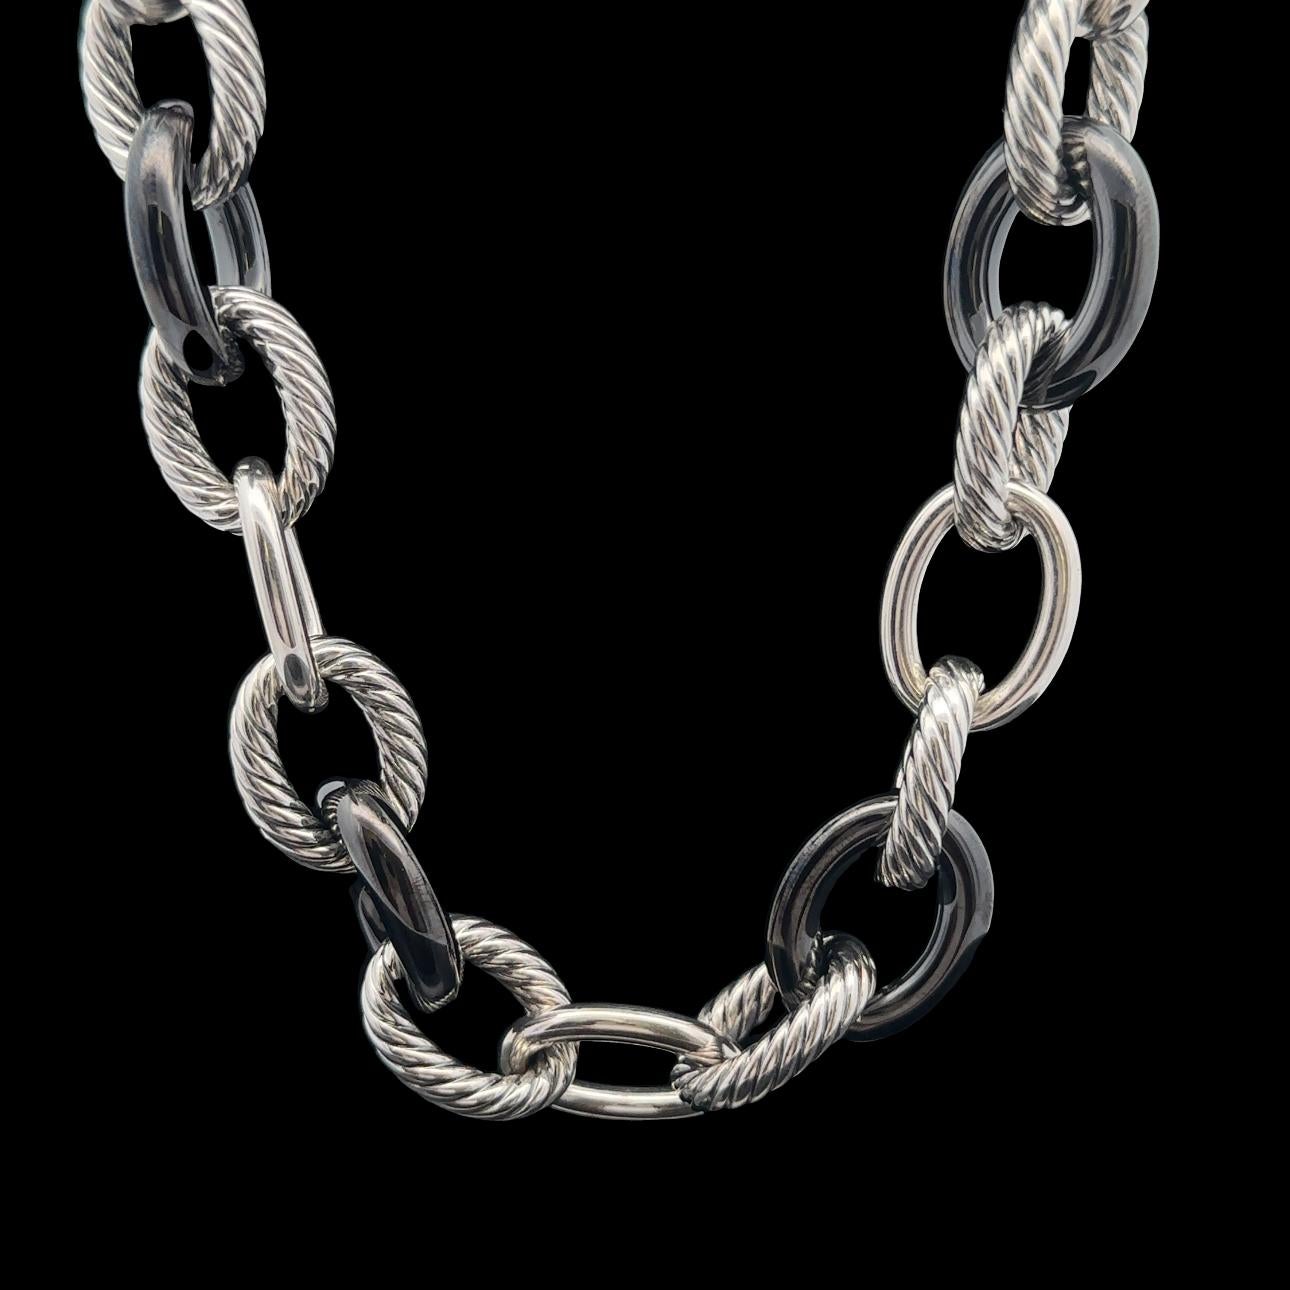 Material: Sterling Silver .925 - Dark Grey Ceramic
Weight: 129.67 Grams
Chain Type: Large Cable link - Hidden Hinge Clasp
Chain Length: 17.5